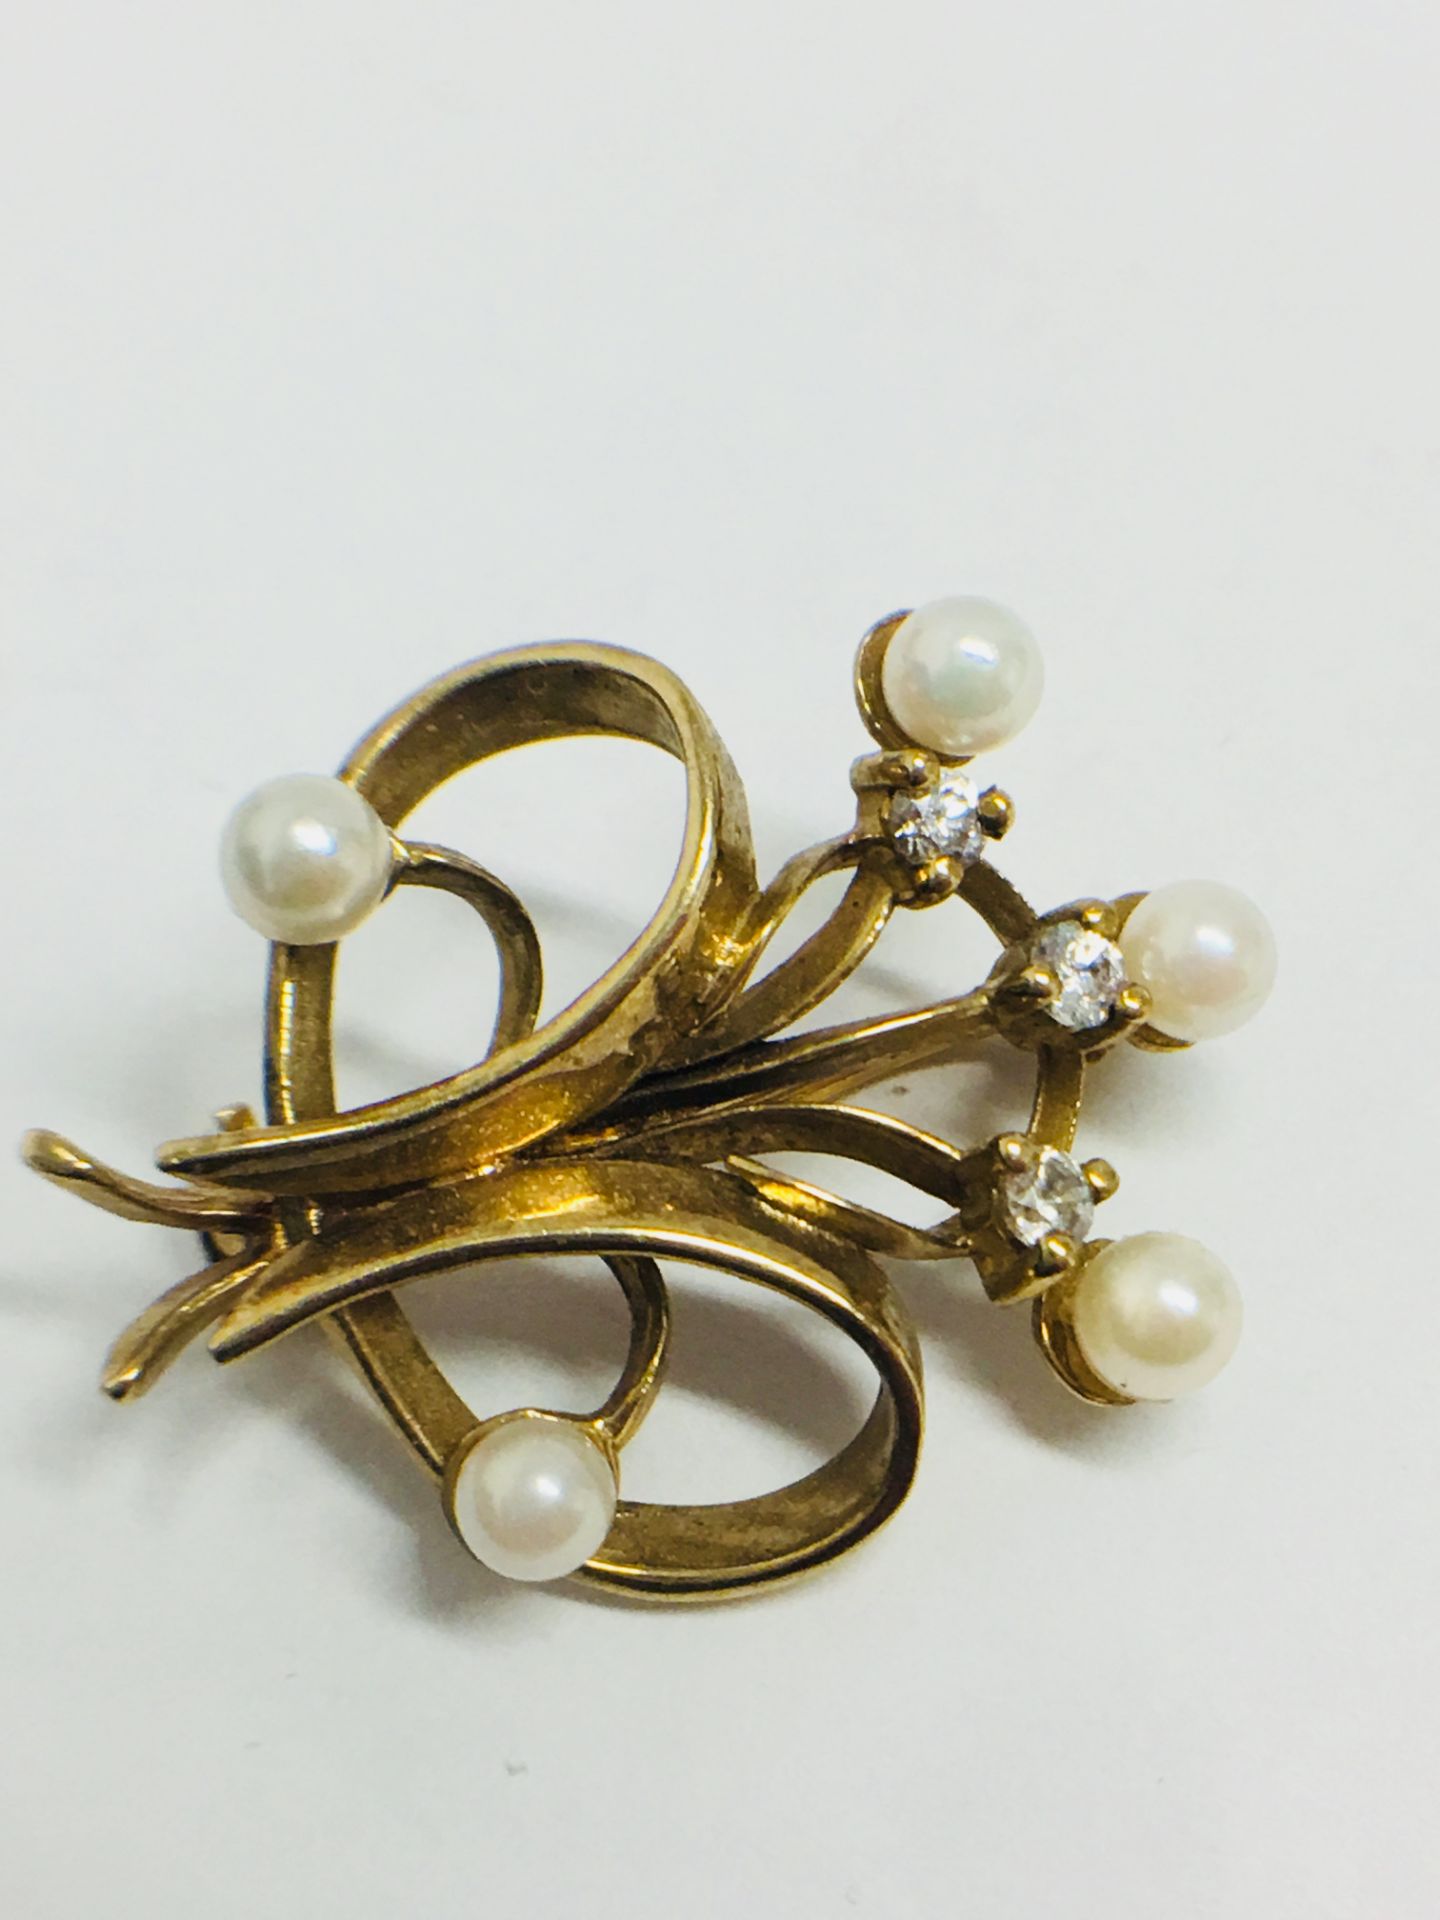 9K Yellow Gold Cultured Pearl and CZ broach - Image 5 of 6